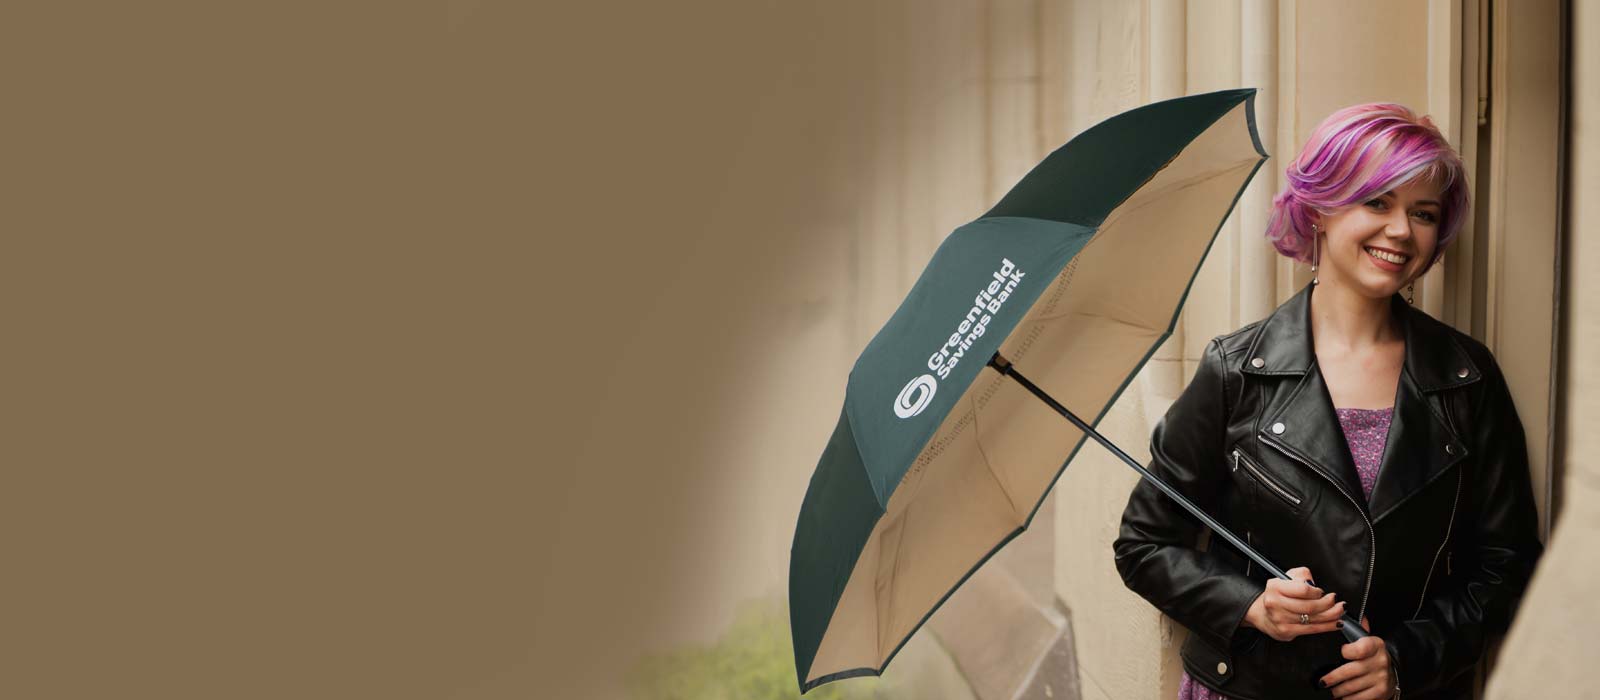 photo of a smiling woman holding a green umbrella with the Greenfield Savings Bank logo on it.